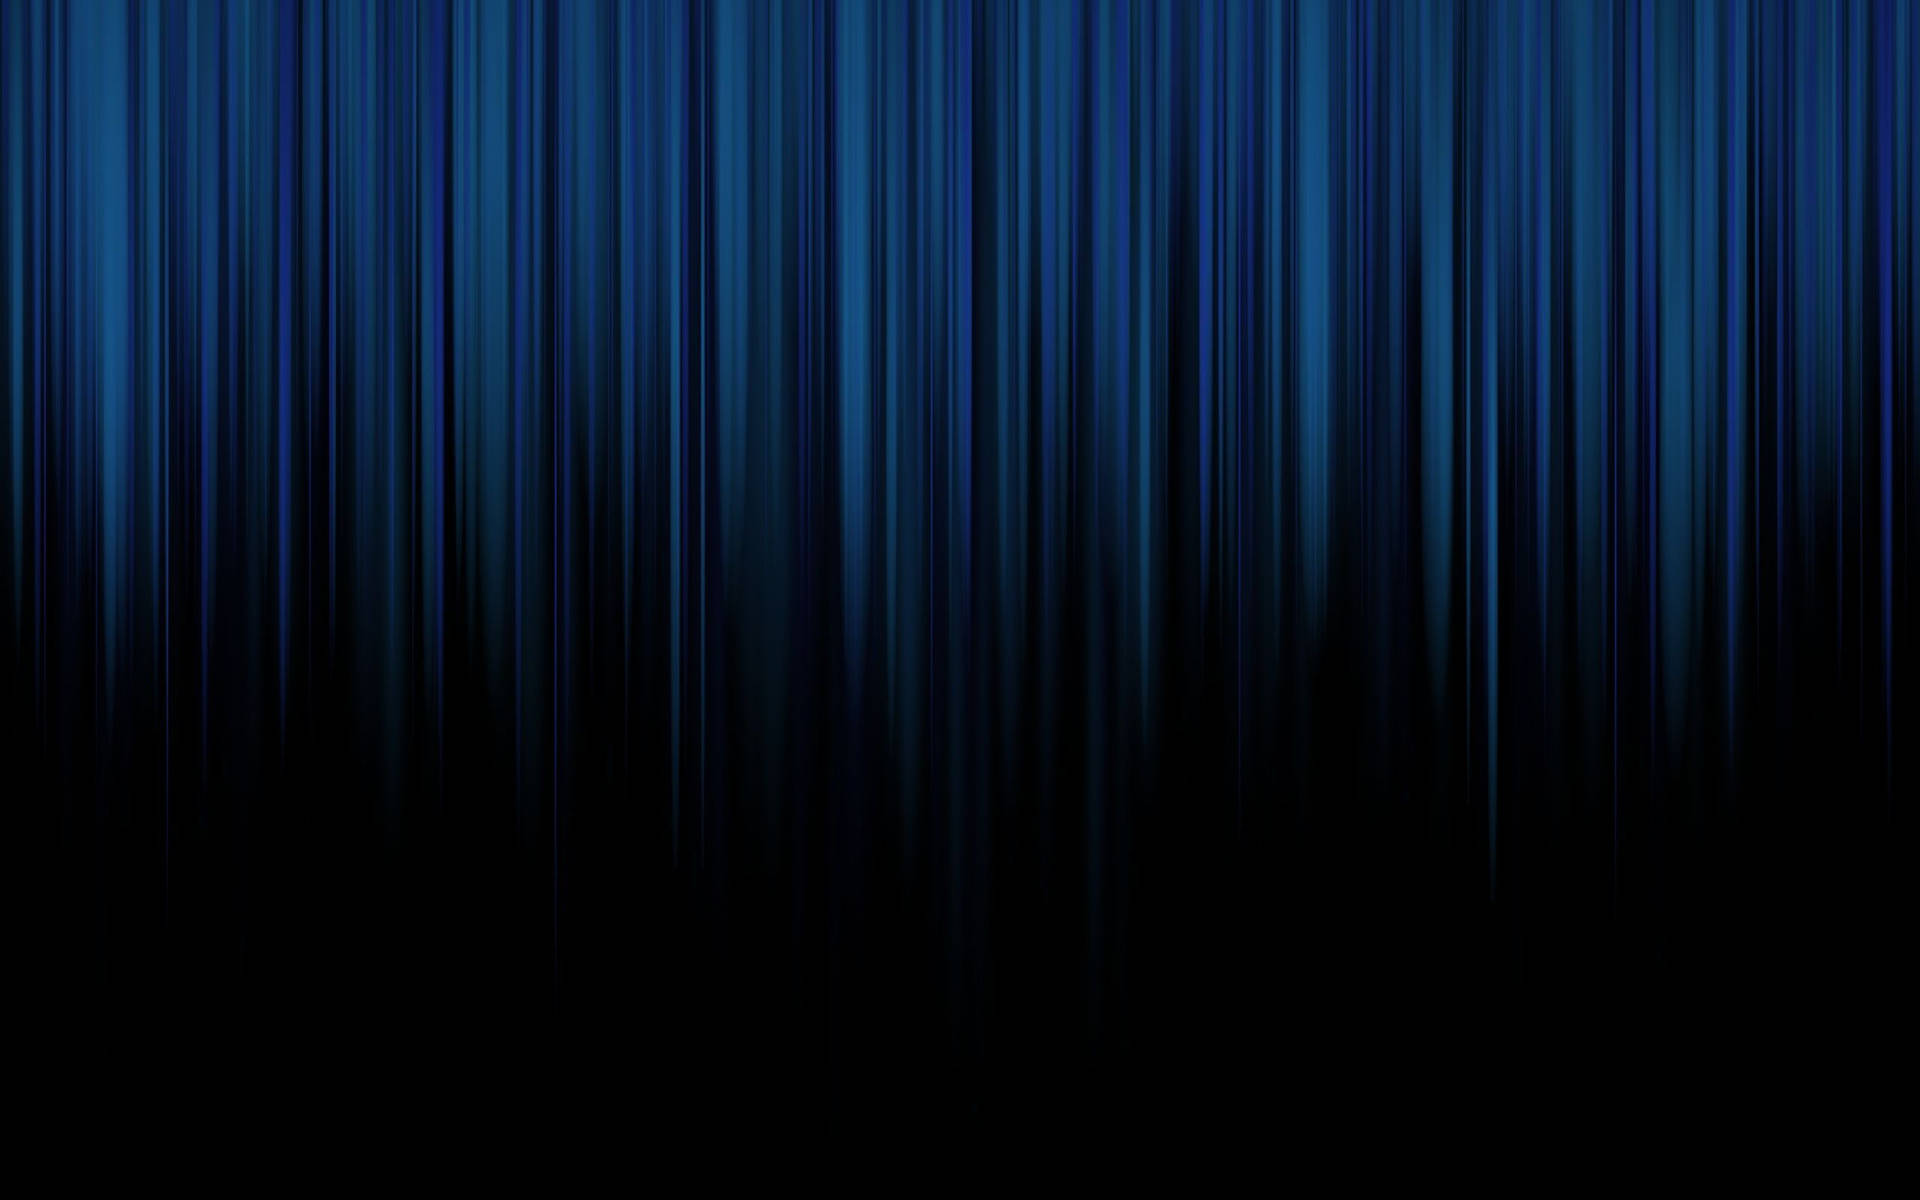 wallpaper blue and black